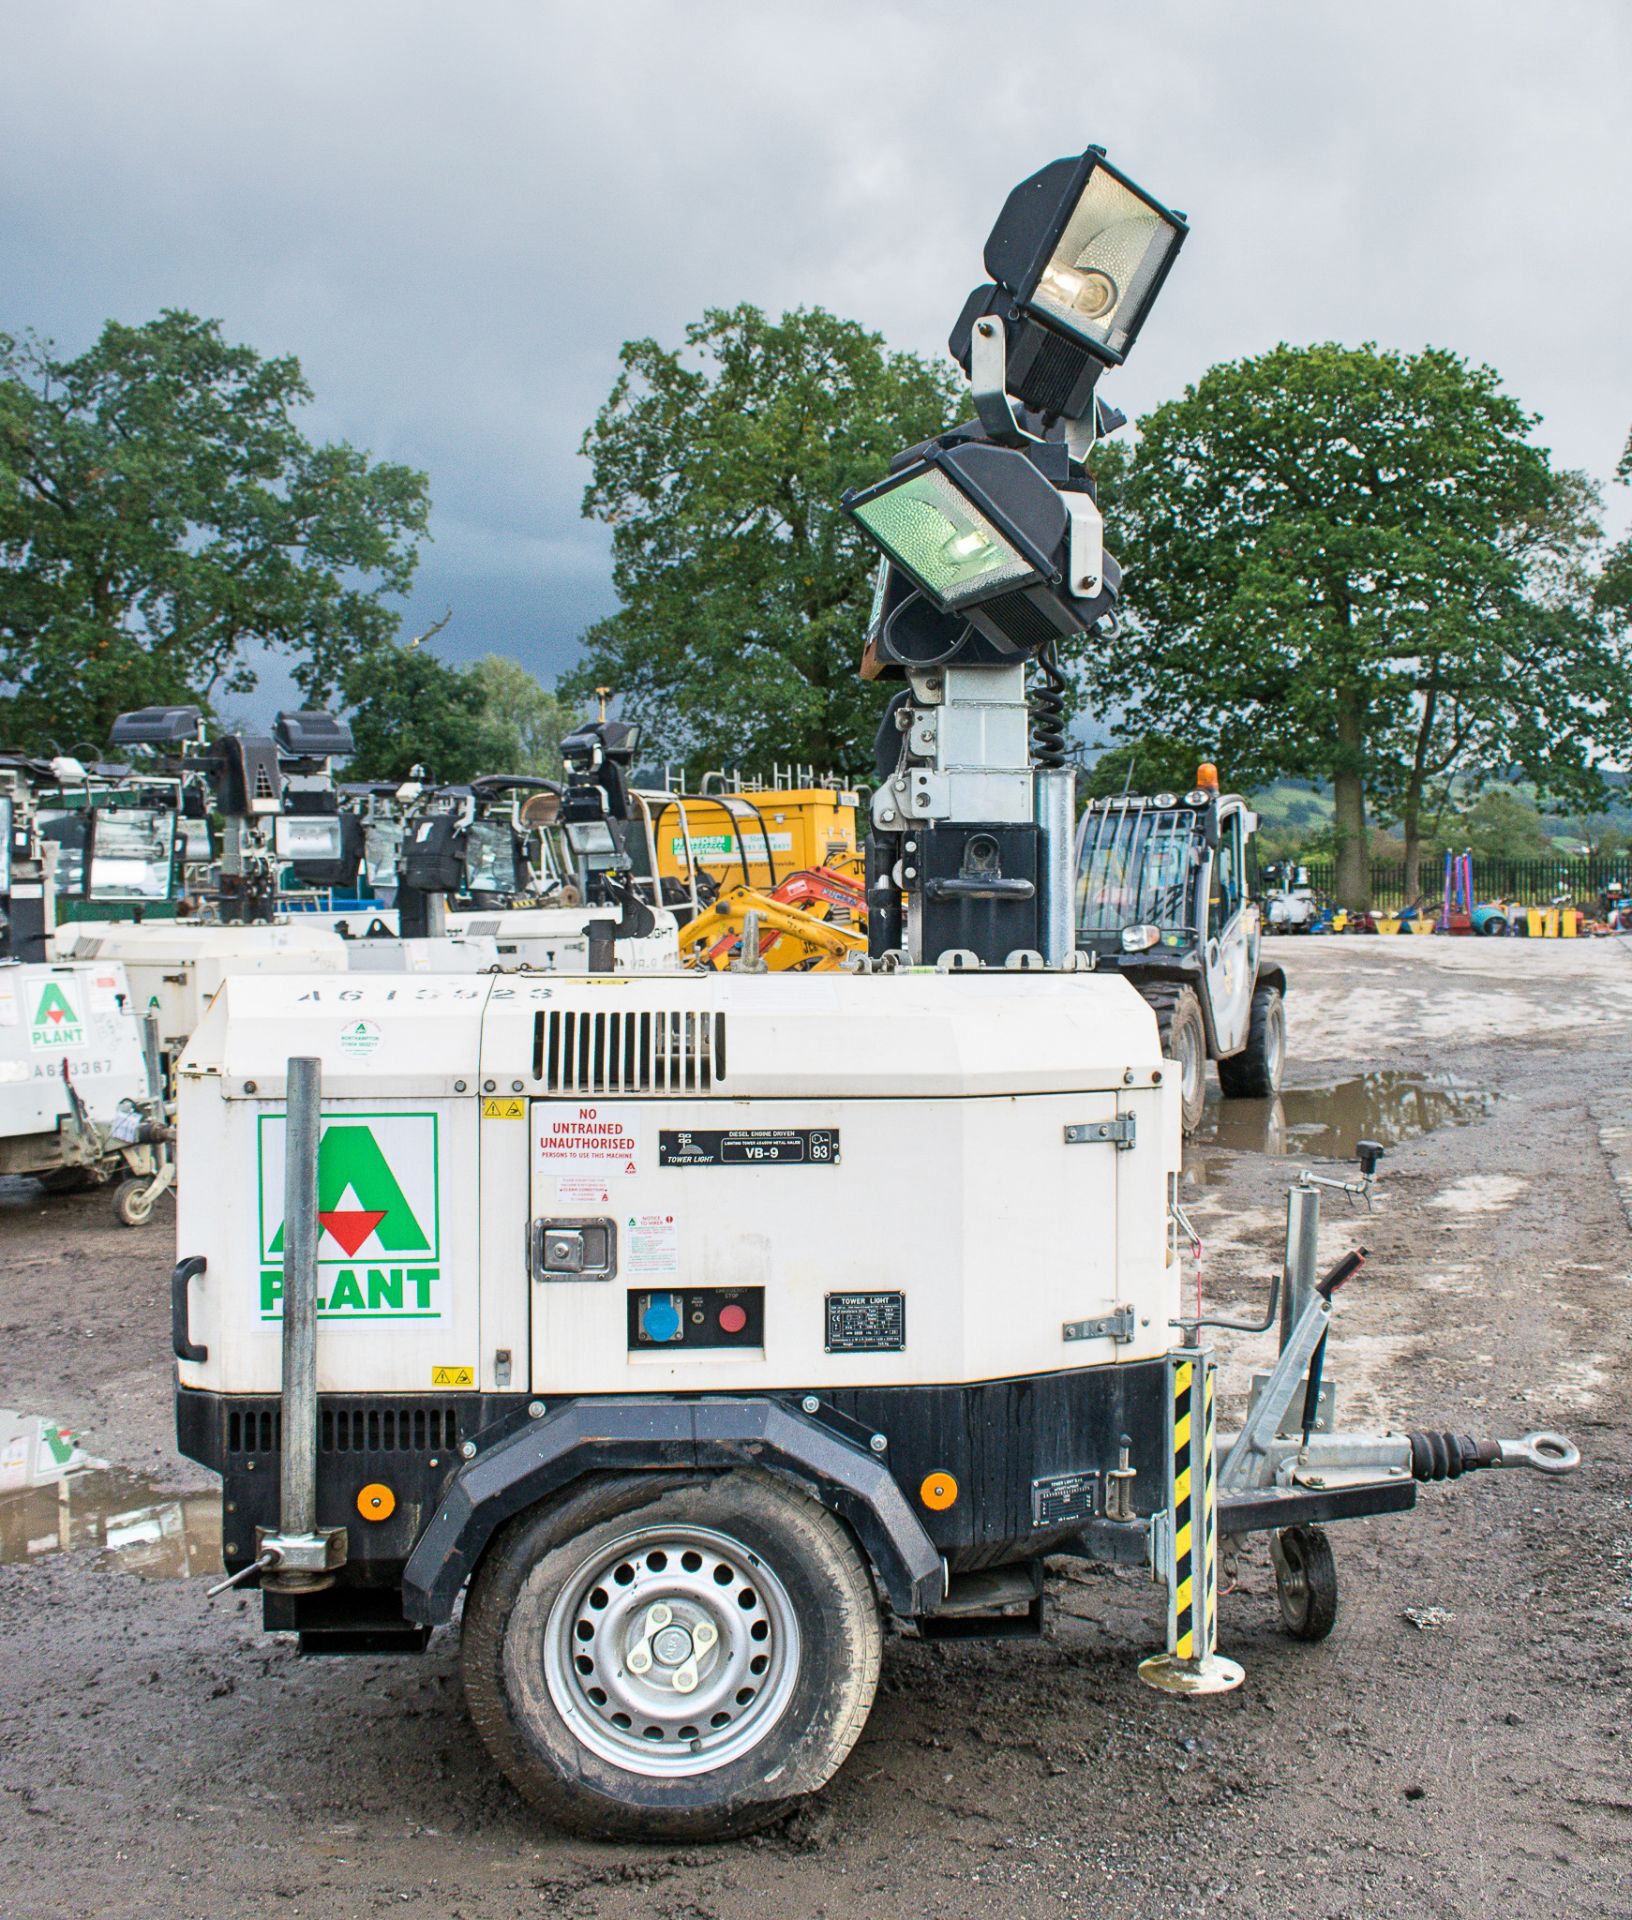 Tower Light VB-9 diesel driven mobile lighting tower Year: 2013 S/N: 1302900 Recorded Hours: 2746 - Image 6 of 9